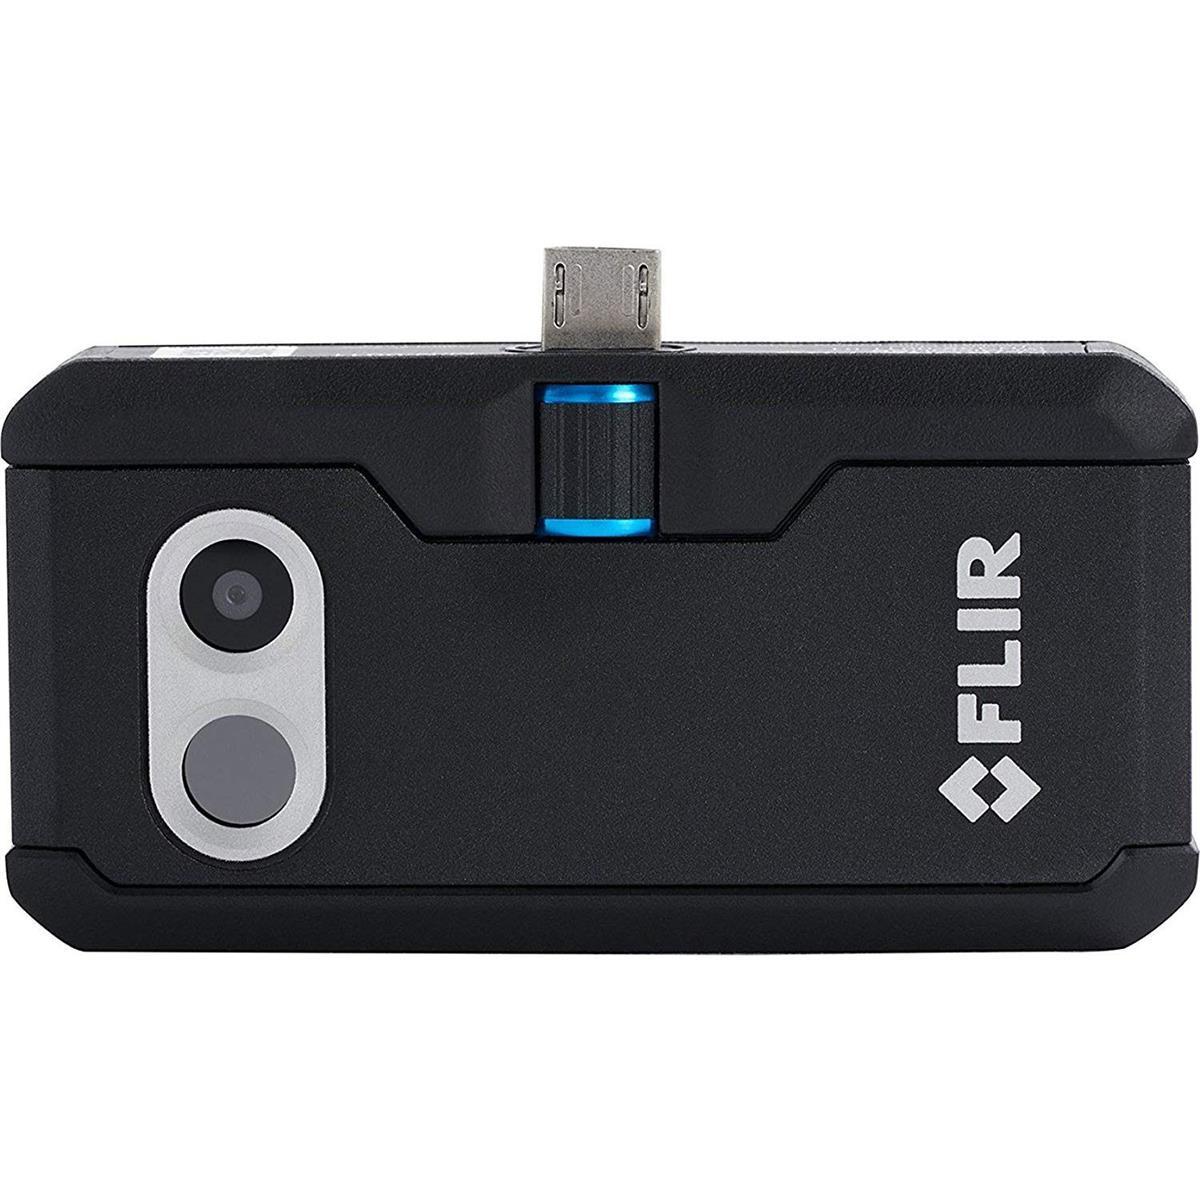 FLIR One Pro LT Thermal Imaging Camera Attachment for $149.99 Shipped